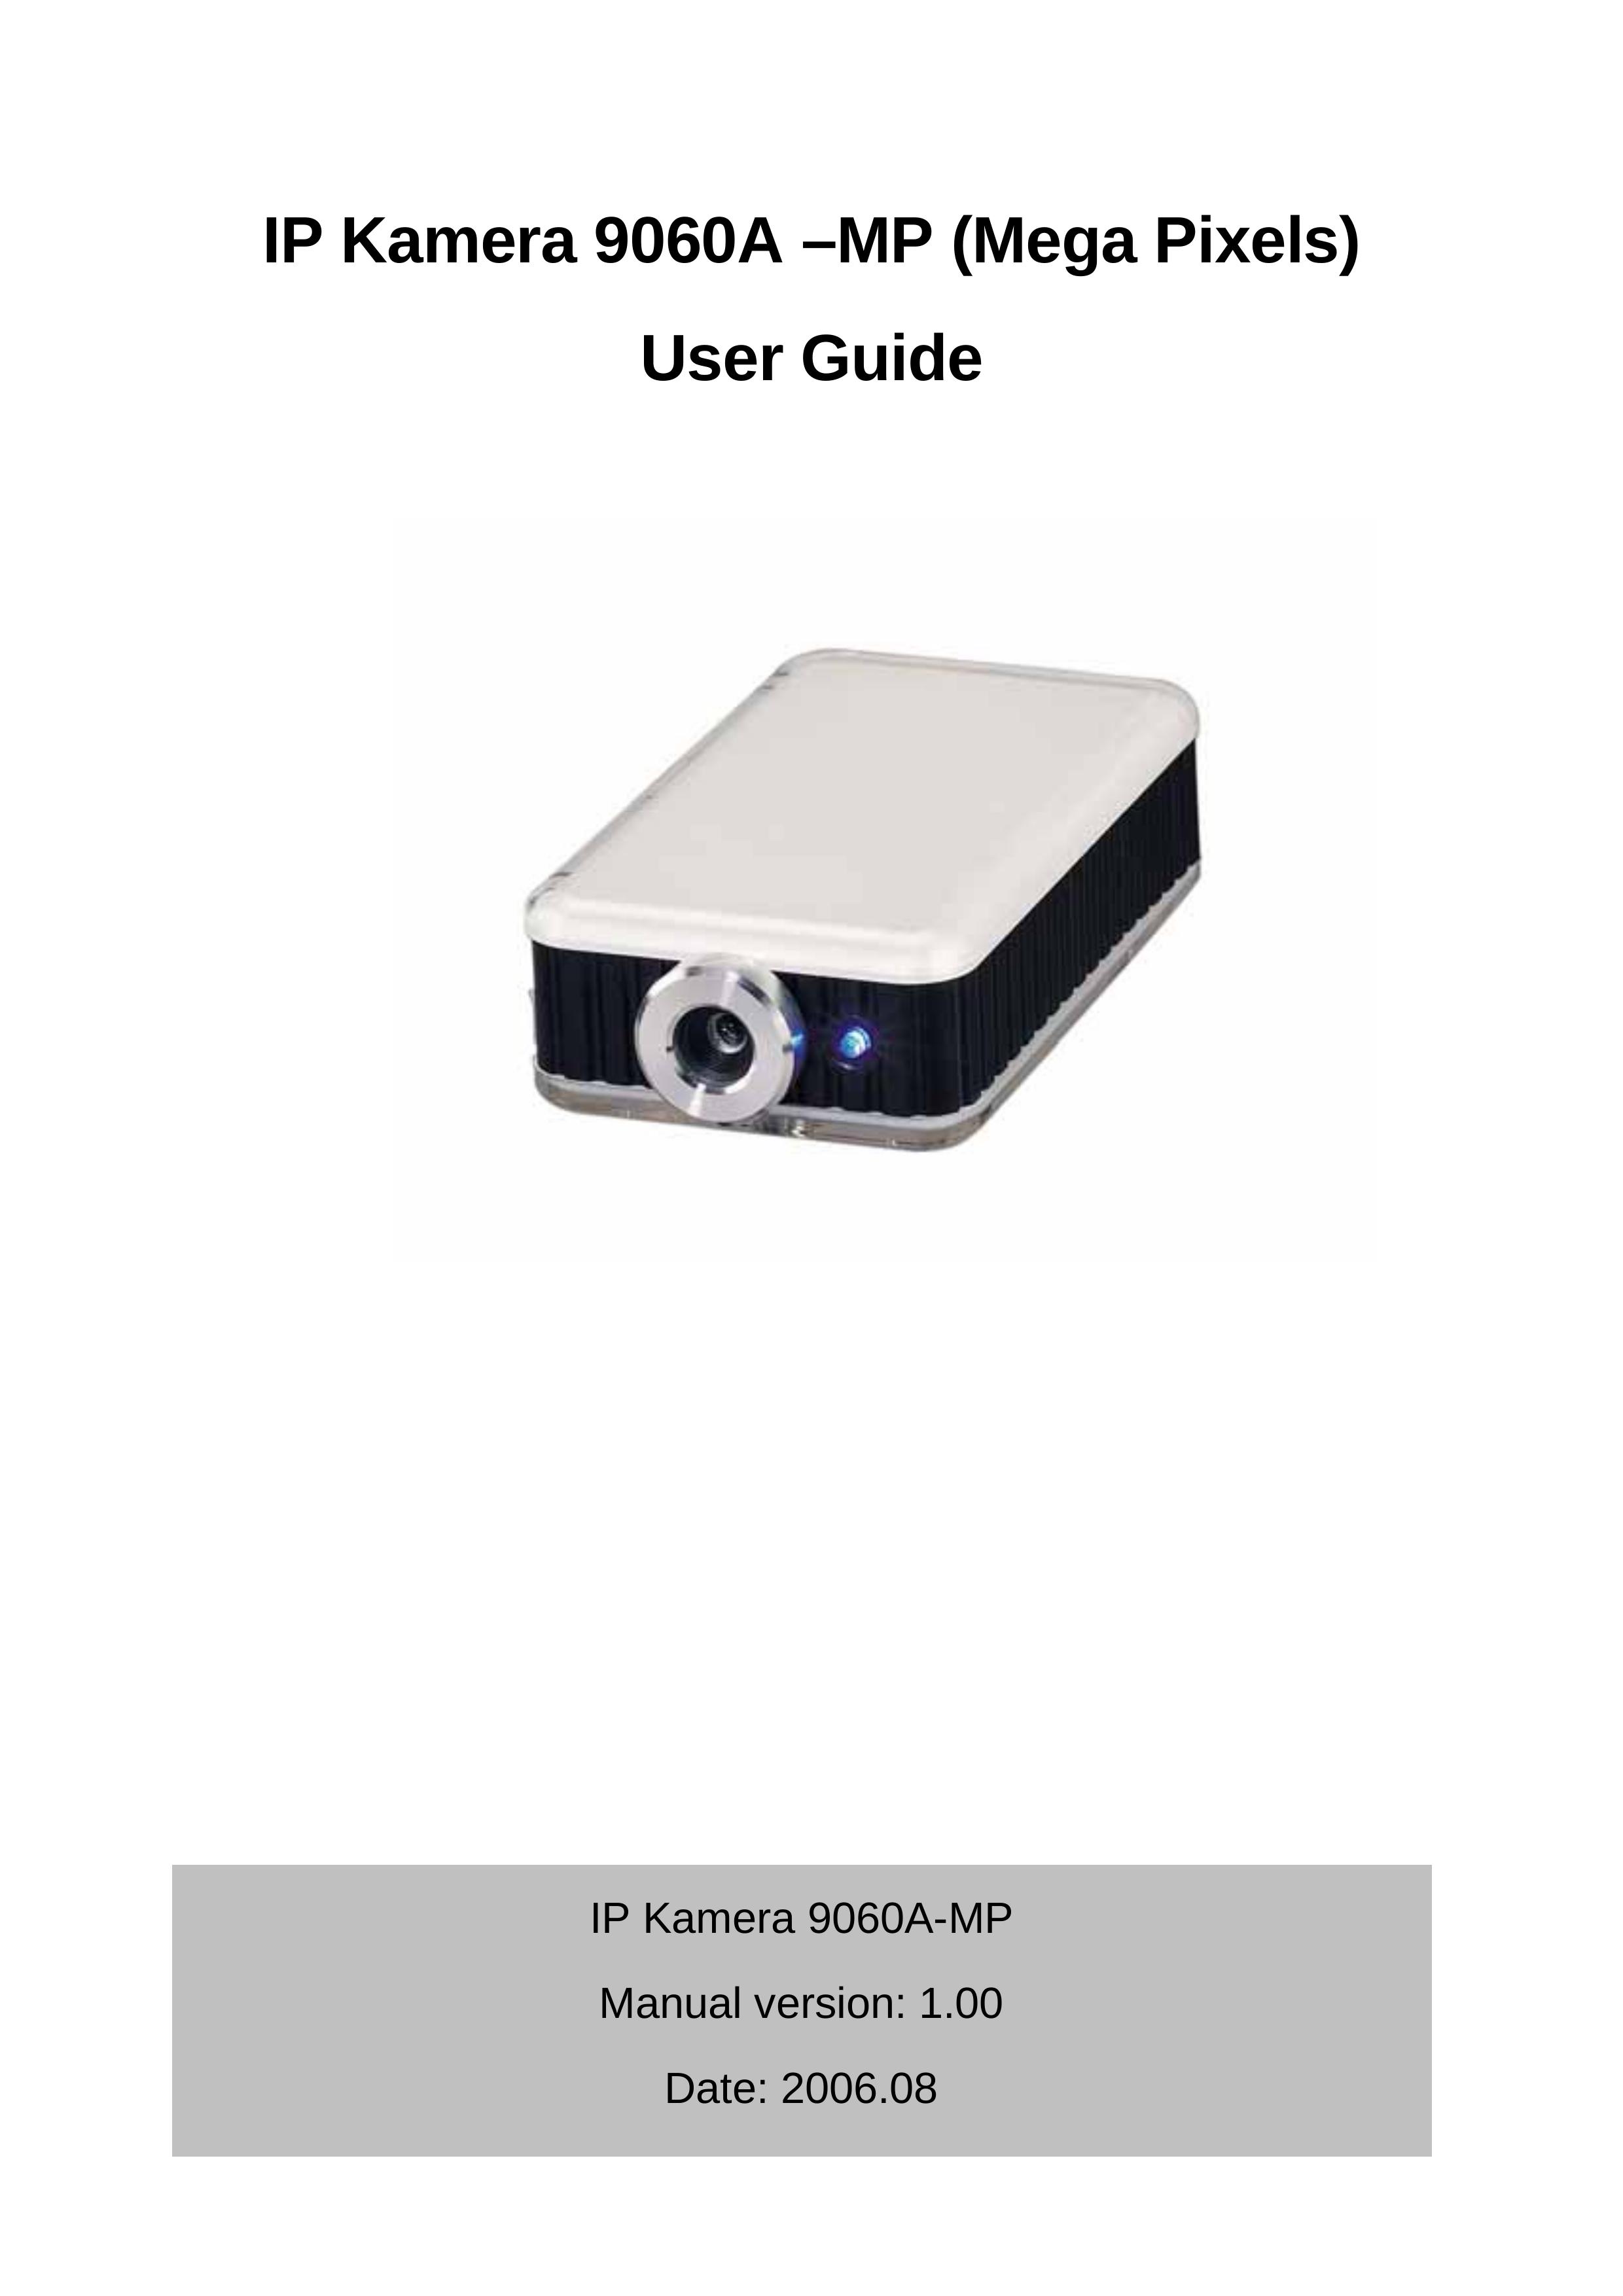 Cabletron Systems 9060A MP Digital Camera User Manual